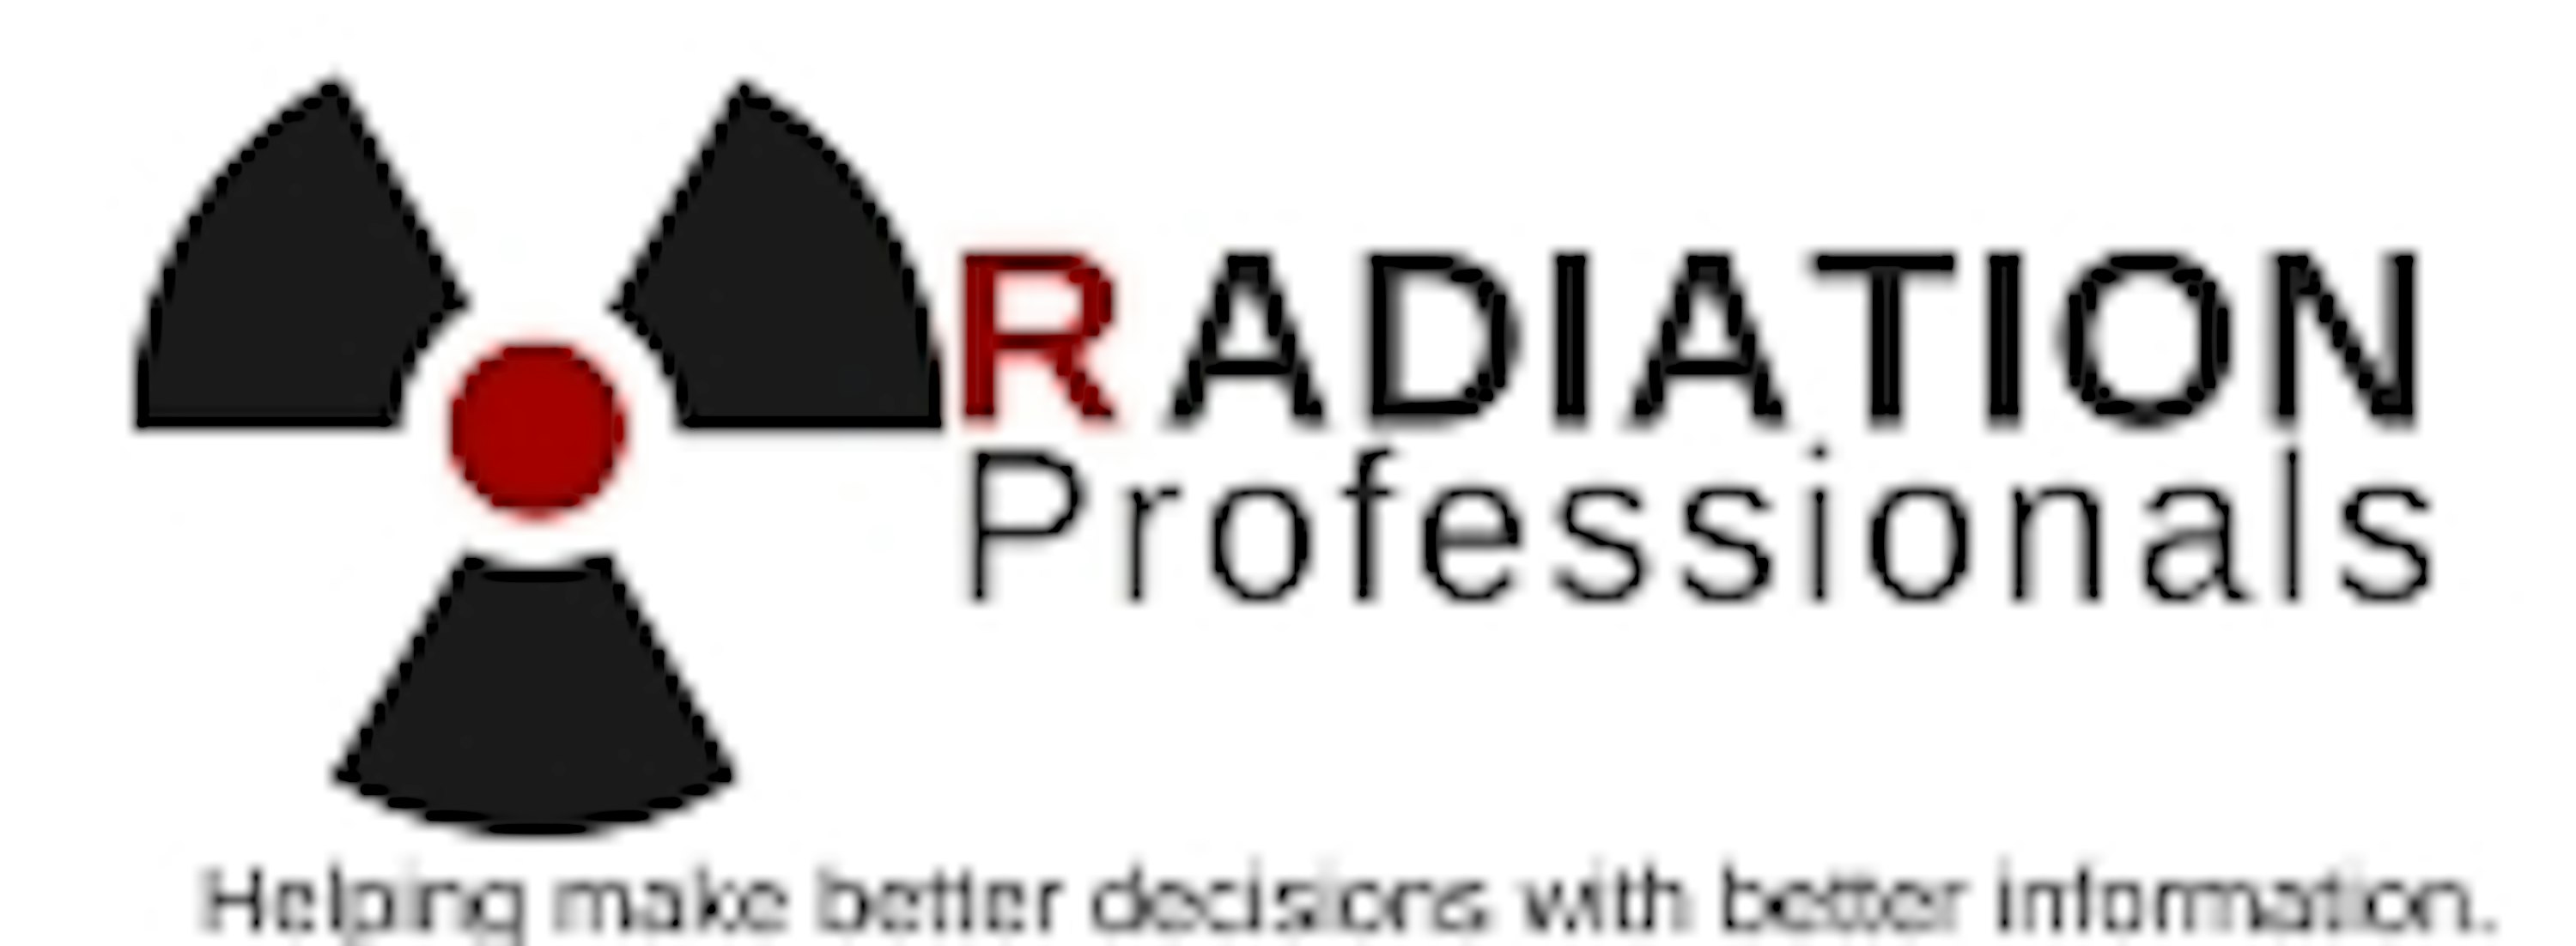 Radiation professionals history,projects